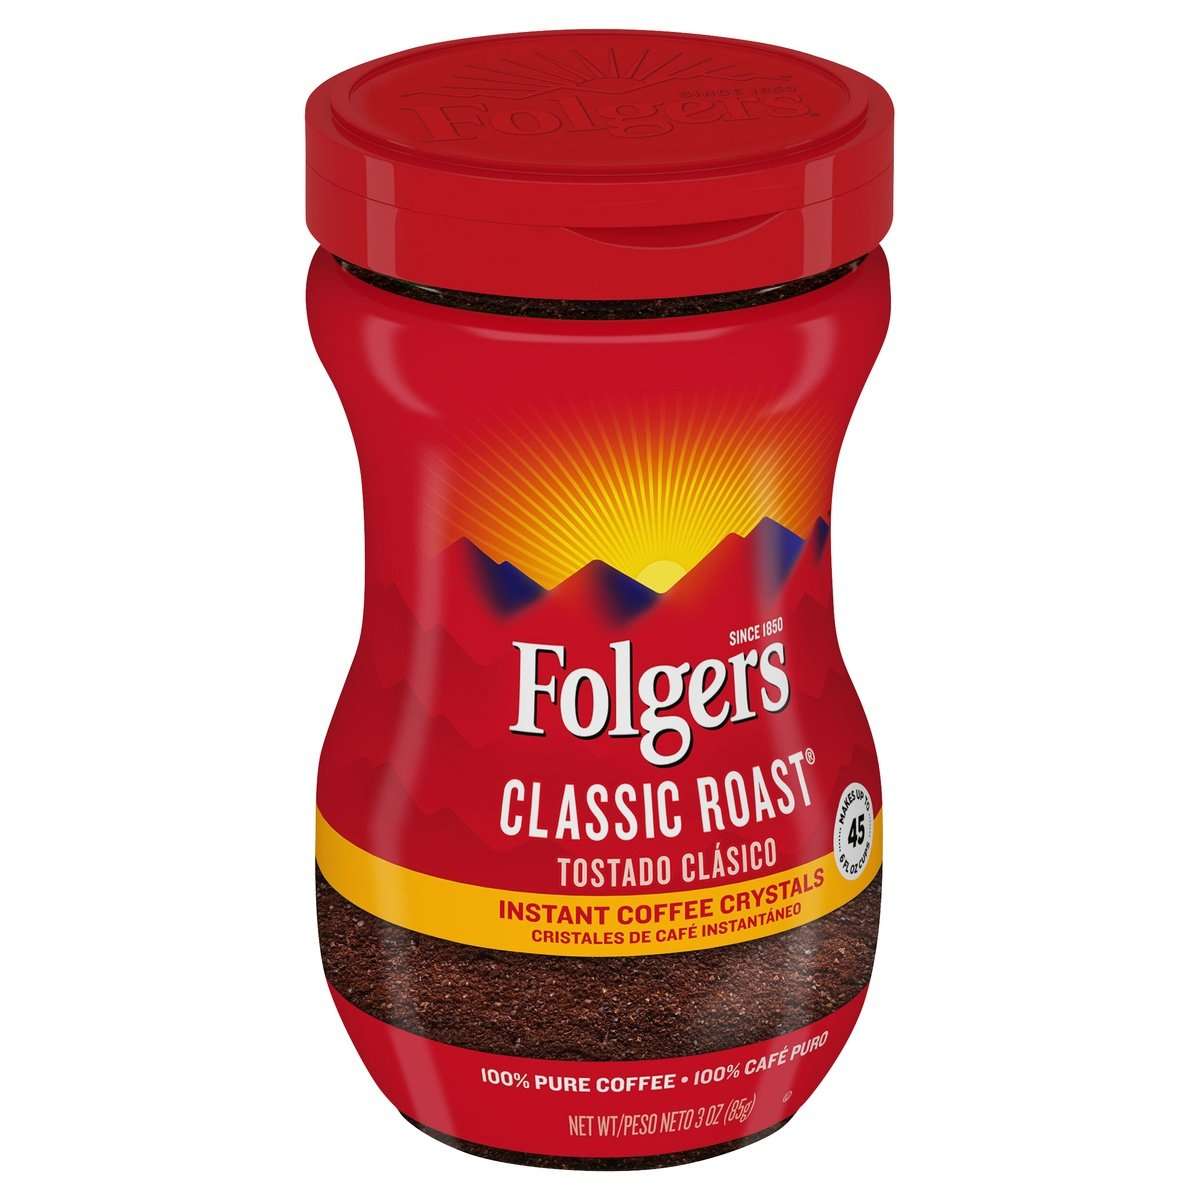 Folgers Classic Roast Instant Coffee Crystals 3 oz